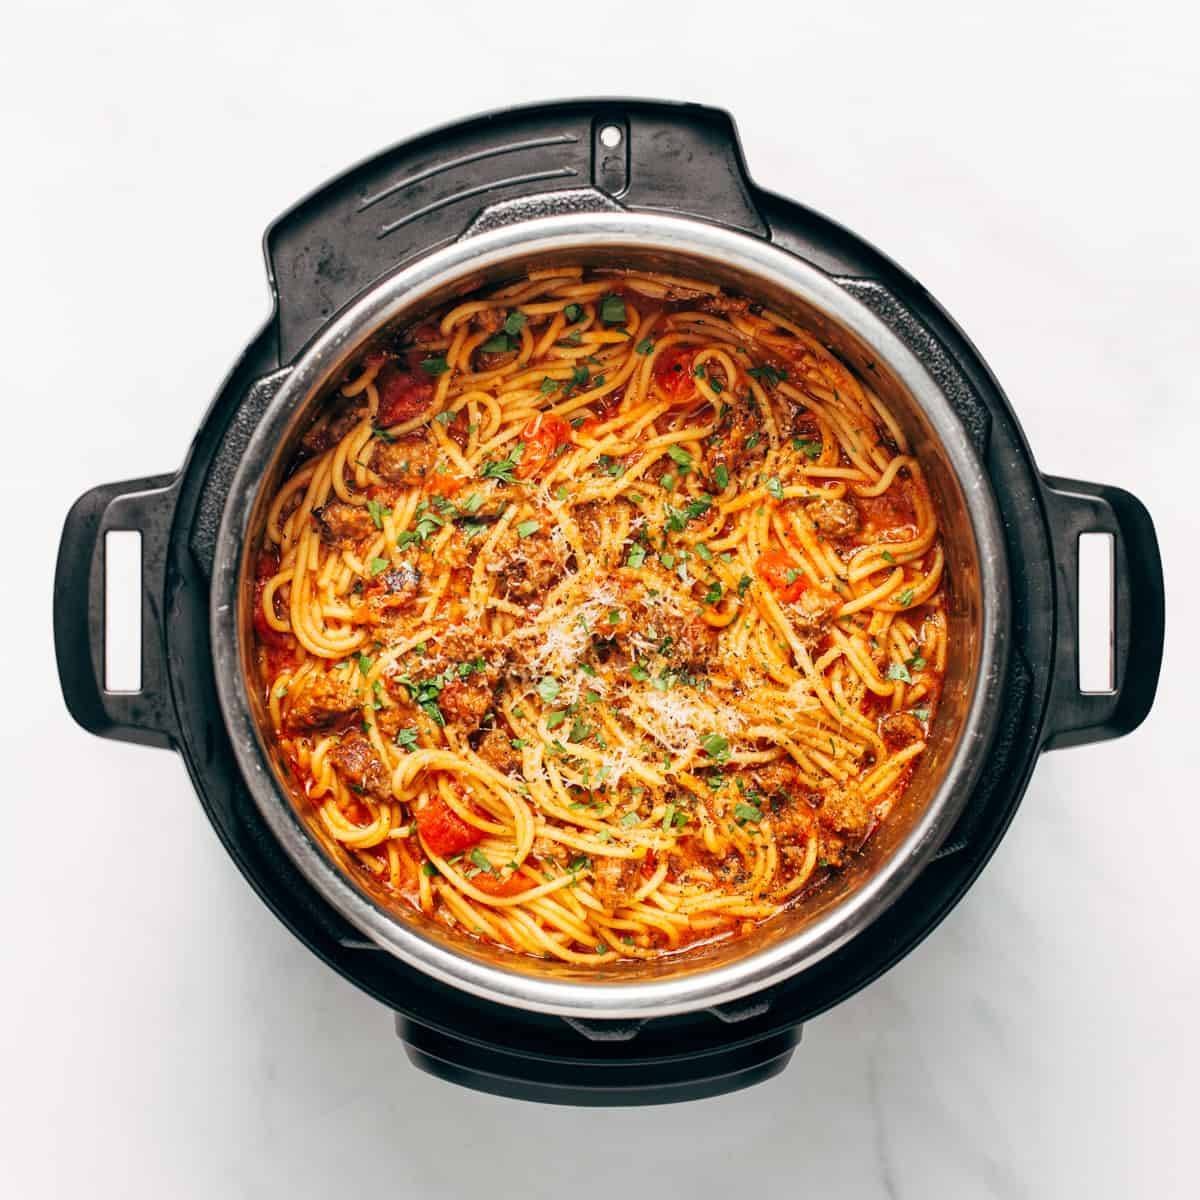 Cooked spaghetti in the instant pot